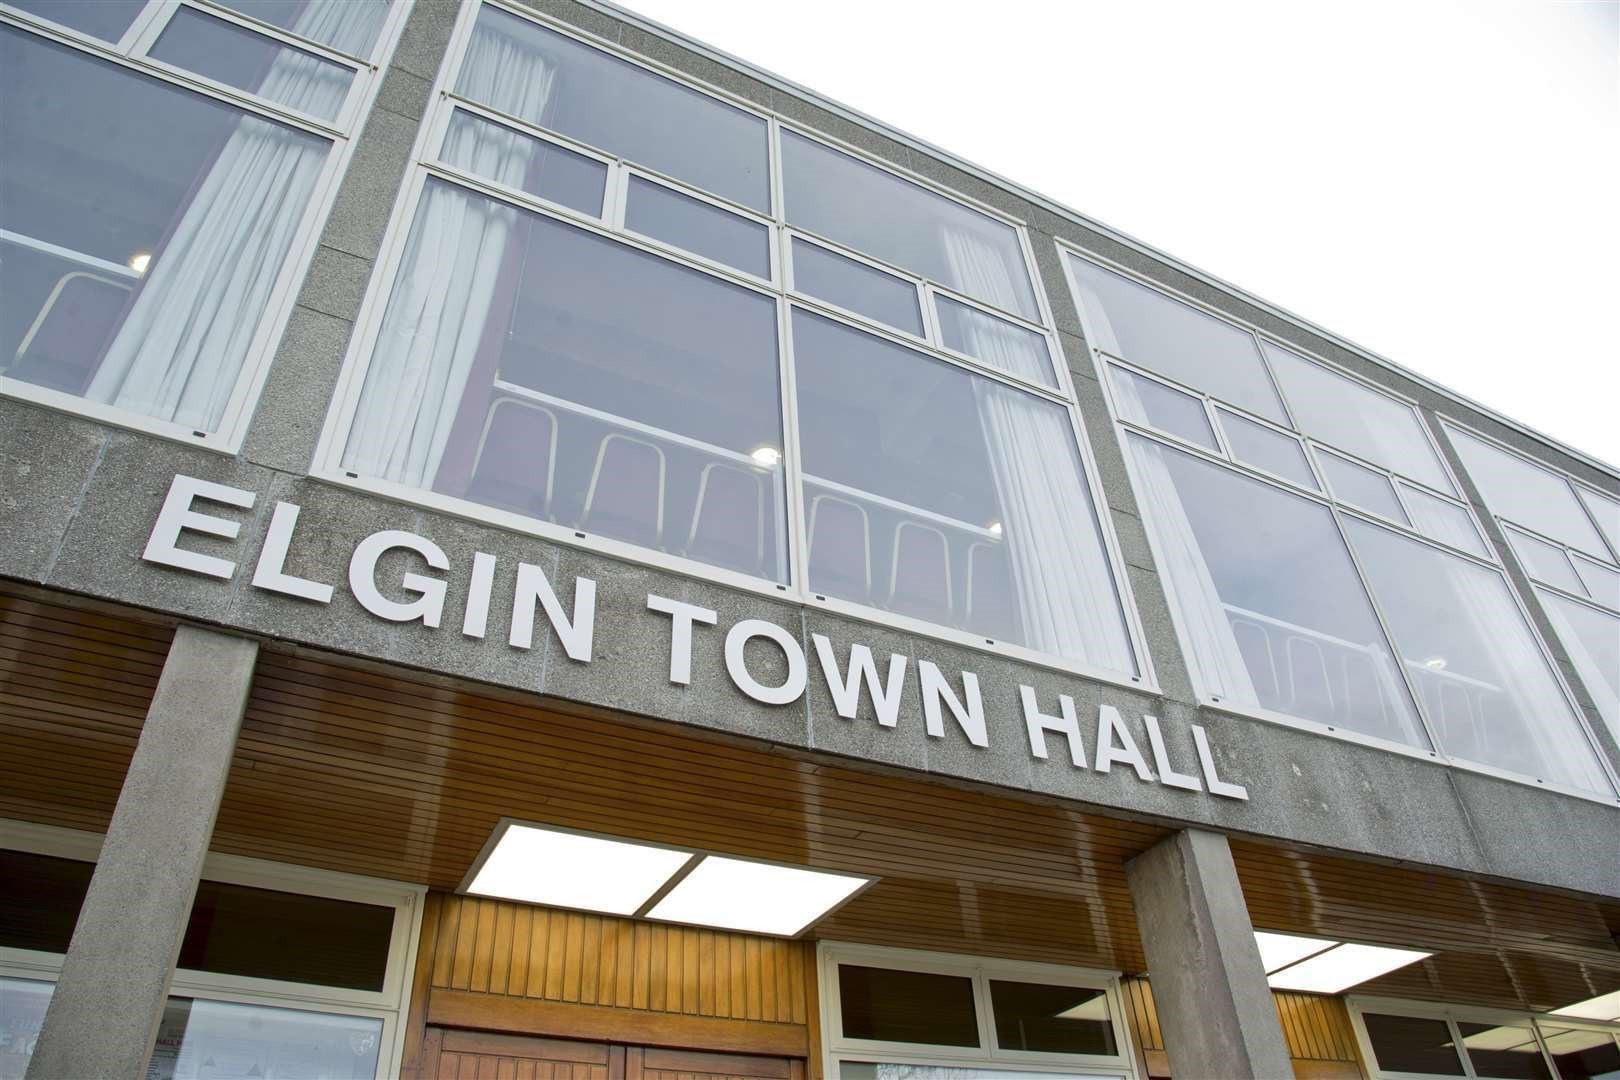 The meeting will take place at Elgin Town Hall next Tuesday.